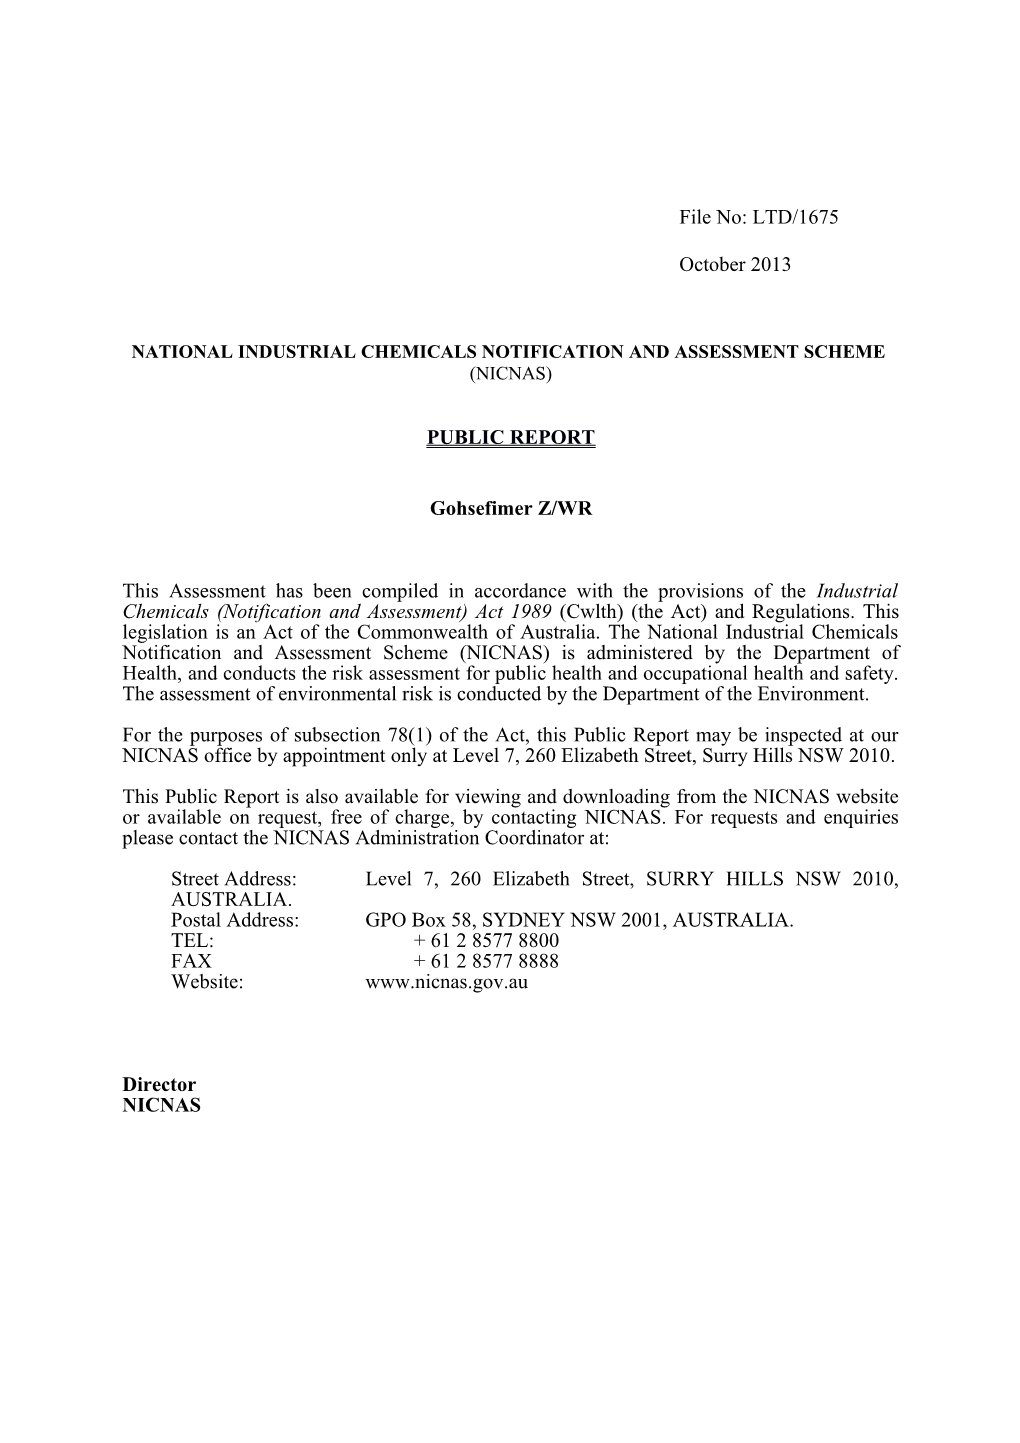 National Industrial Chemicals Notification and Assessment Scheme s41